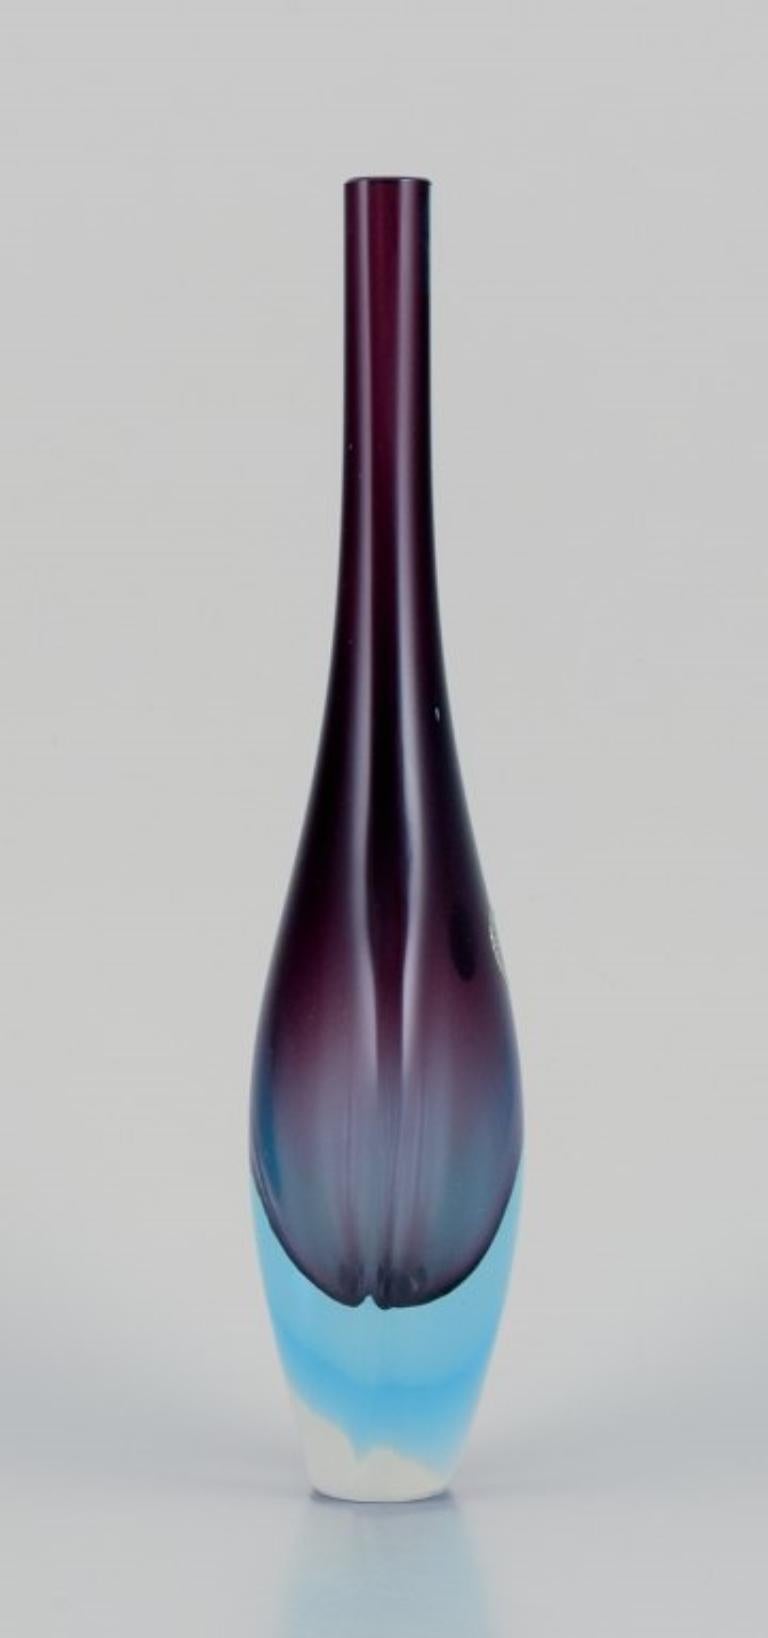 Italian Murano, Italy. Art glass vase with a slender neck. Blue and purple glass.  For Sale